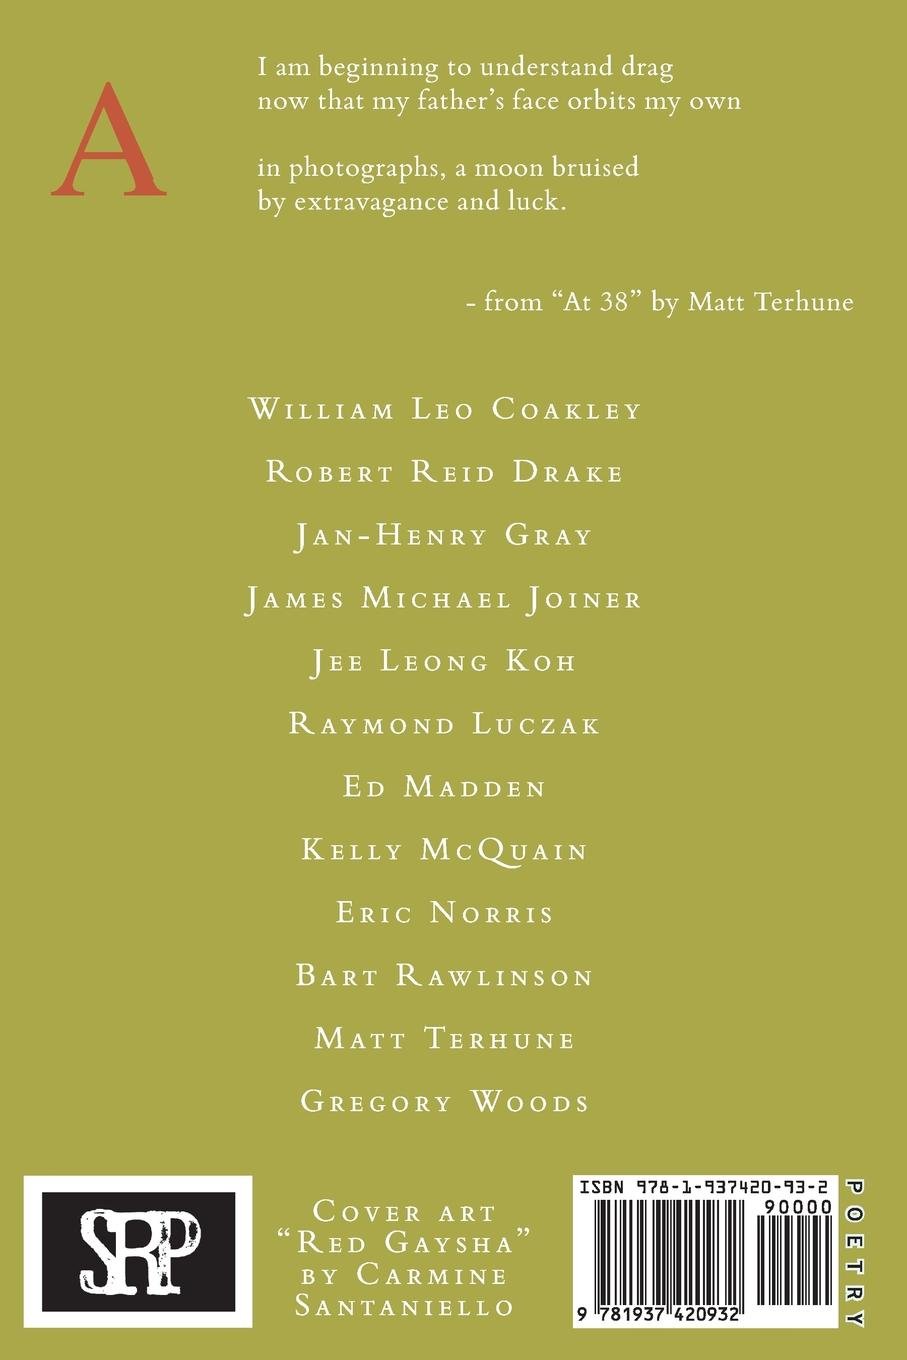 Assaracus Issue 18: A Journal of Gay Poetry (Koh, Madden, Woods)